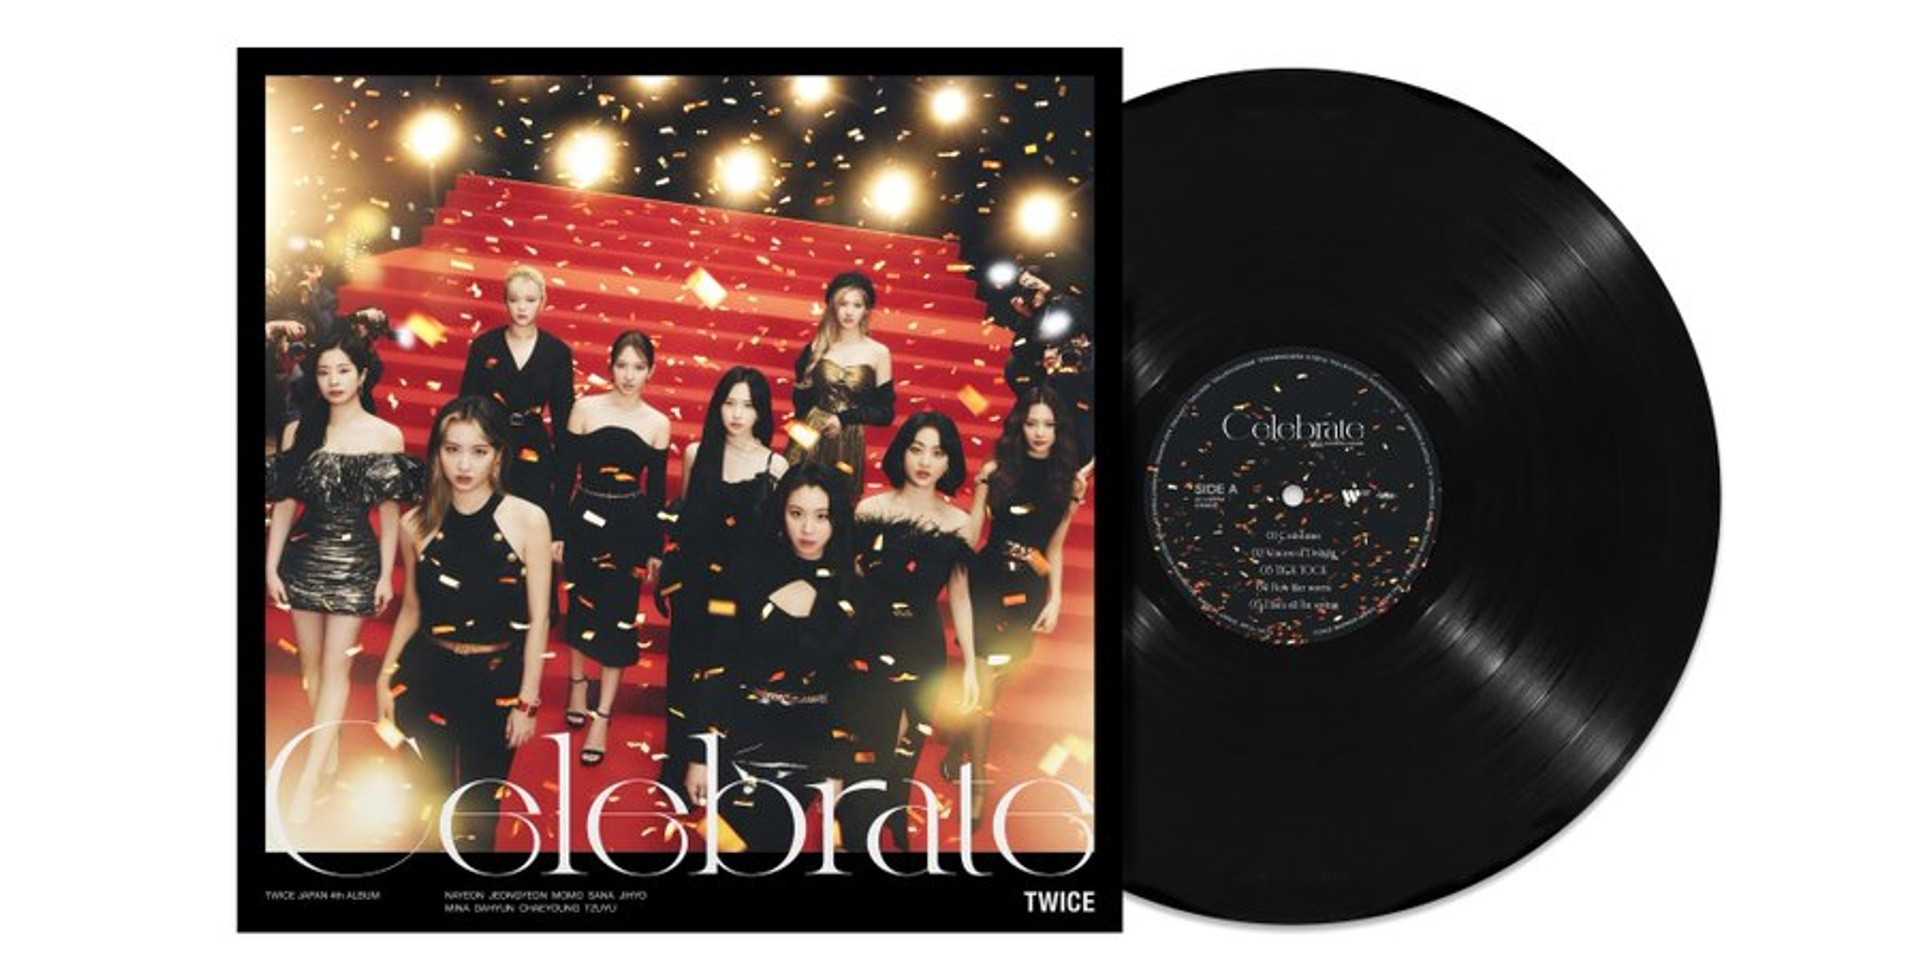 TWICE to release vinyl edition of 4th Japanese album, 'Celebrate' |